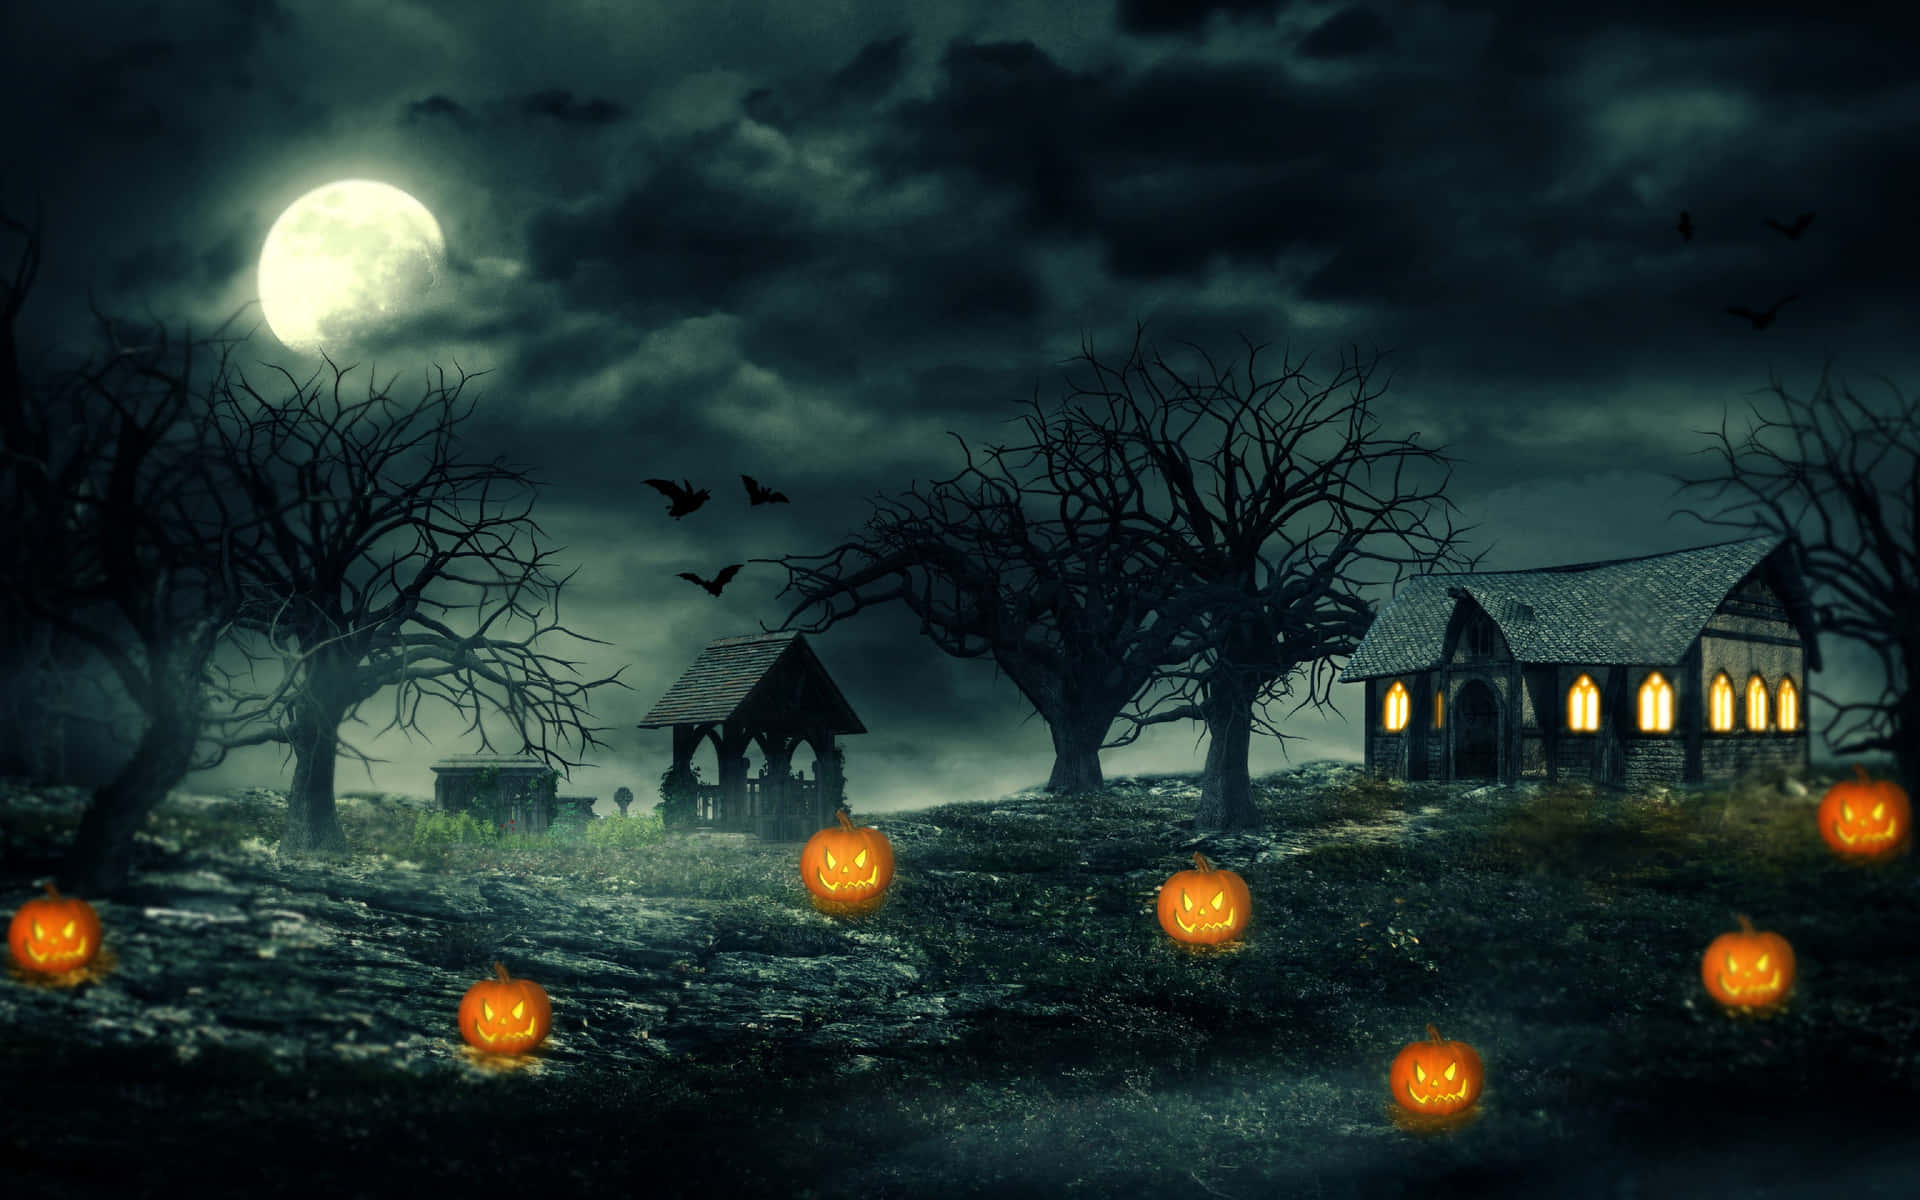 Spend a Frightful Night at this Chilling Haunted House